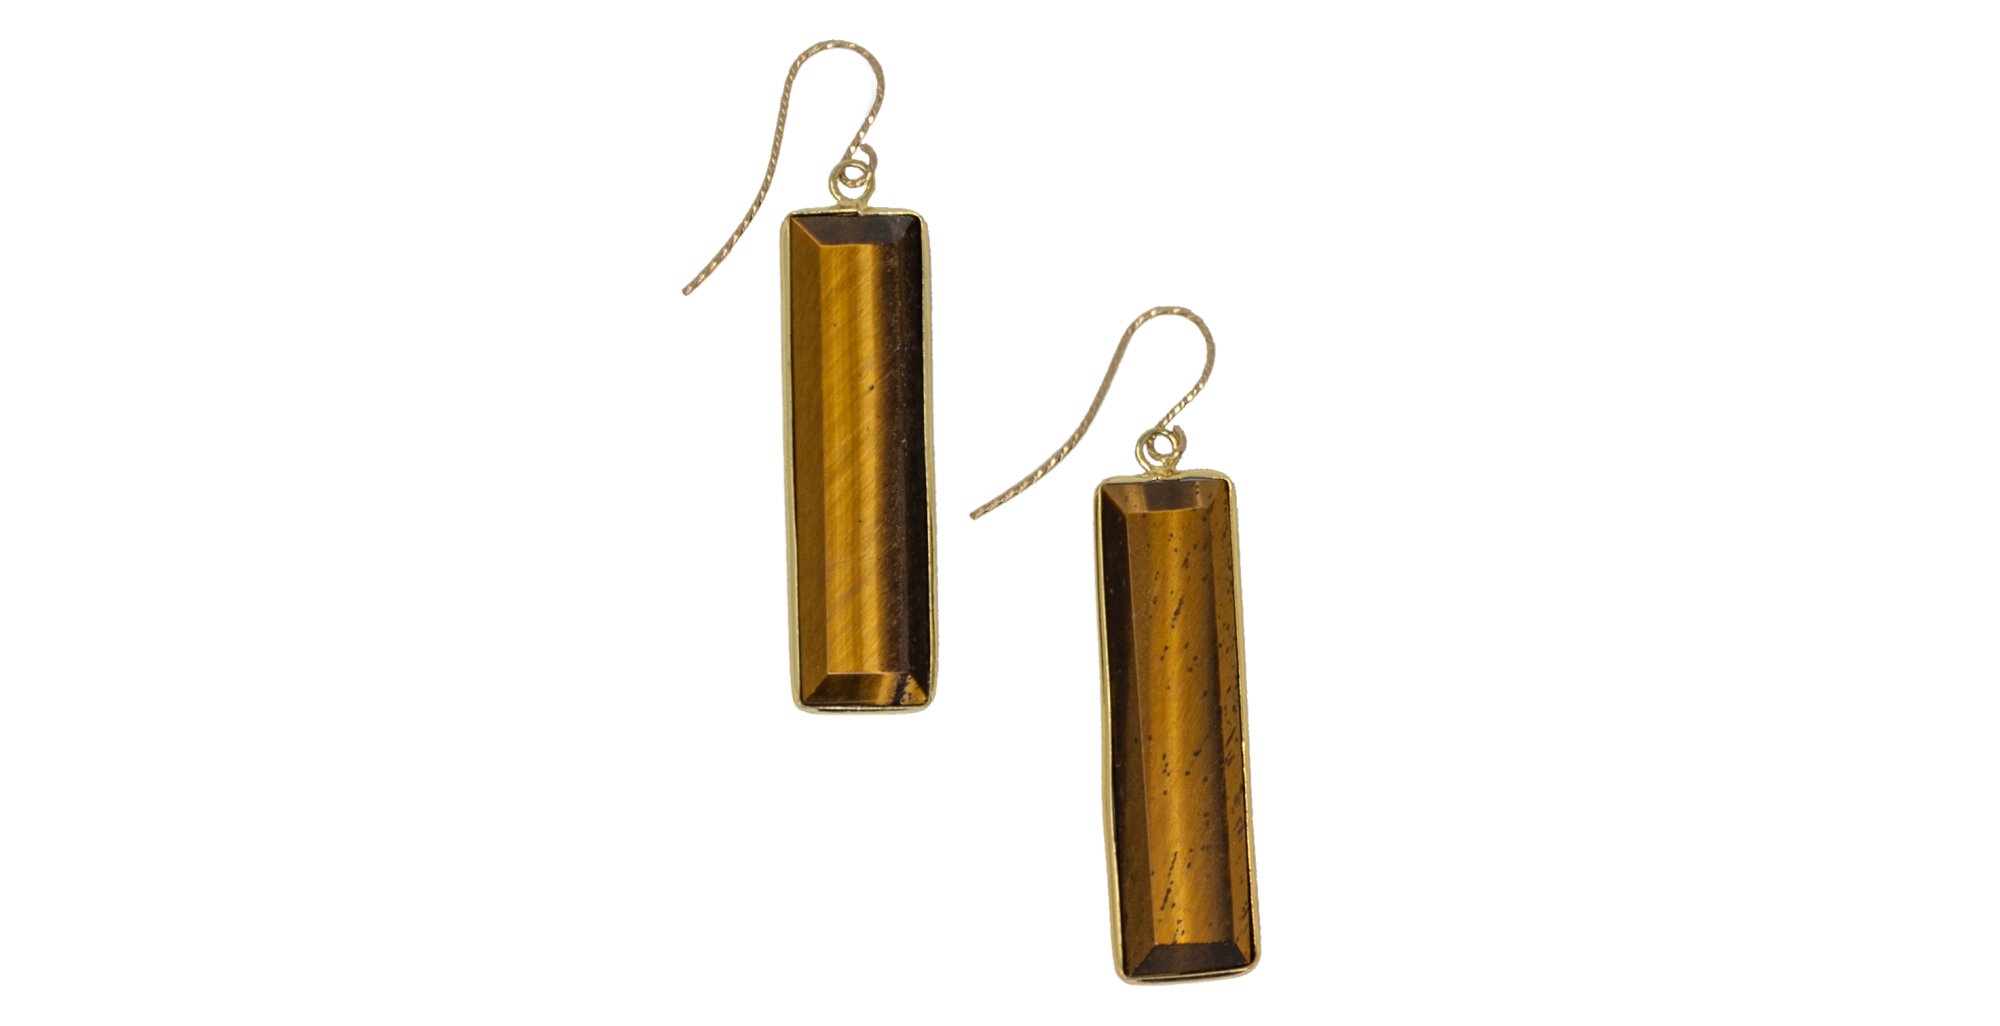 Earrings made of tiger’s eye stones by Michelle Thomas at Civetta Los Angeles